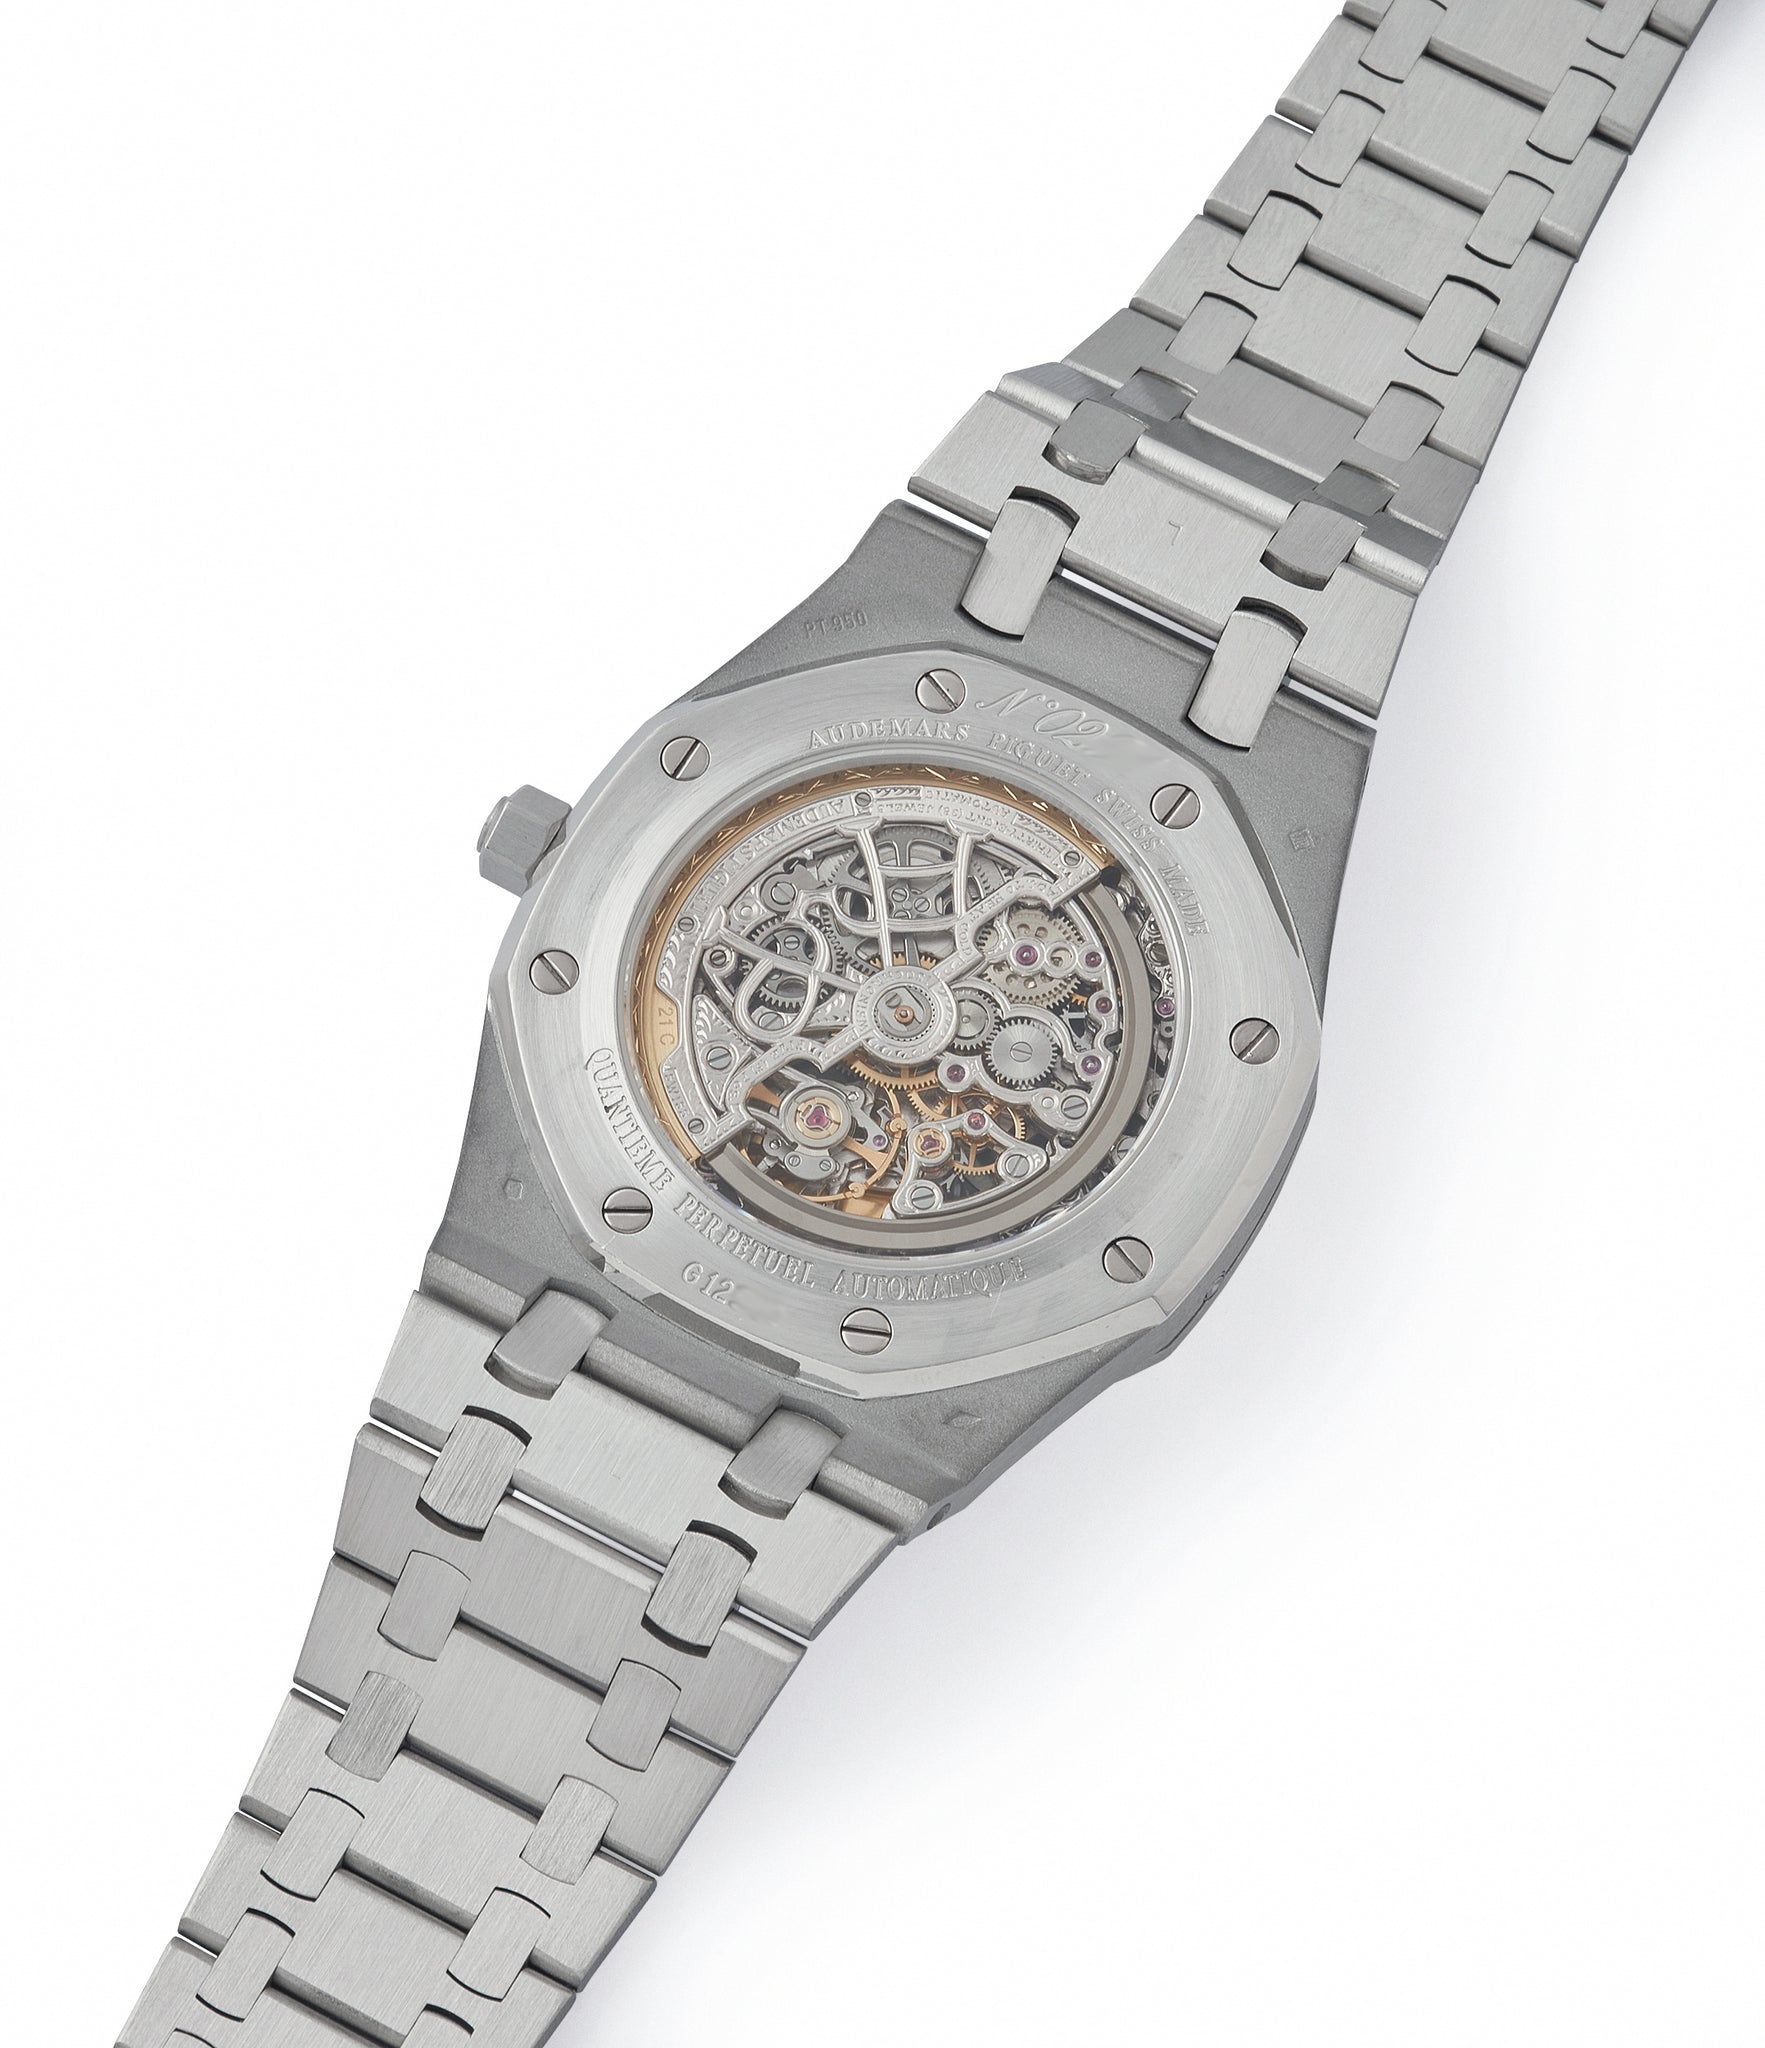 automatic Audemars Piguet Royal Oak perpetual calendar skeleton dial platinum full set pre-owned watch for sale online at A Collected Man London UK specialist of rare watches